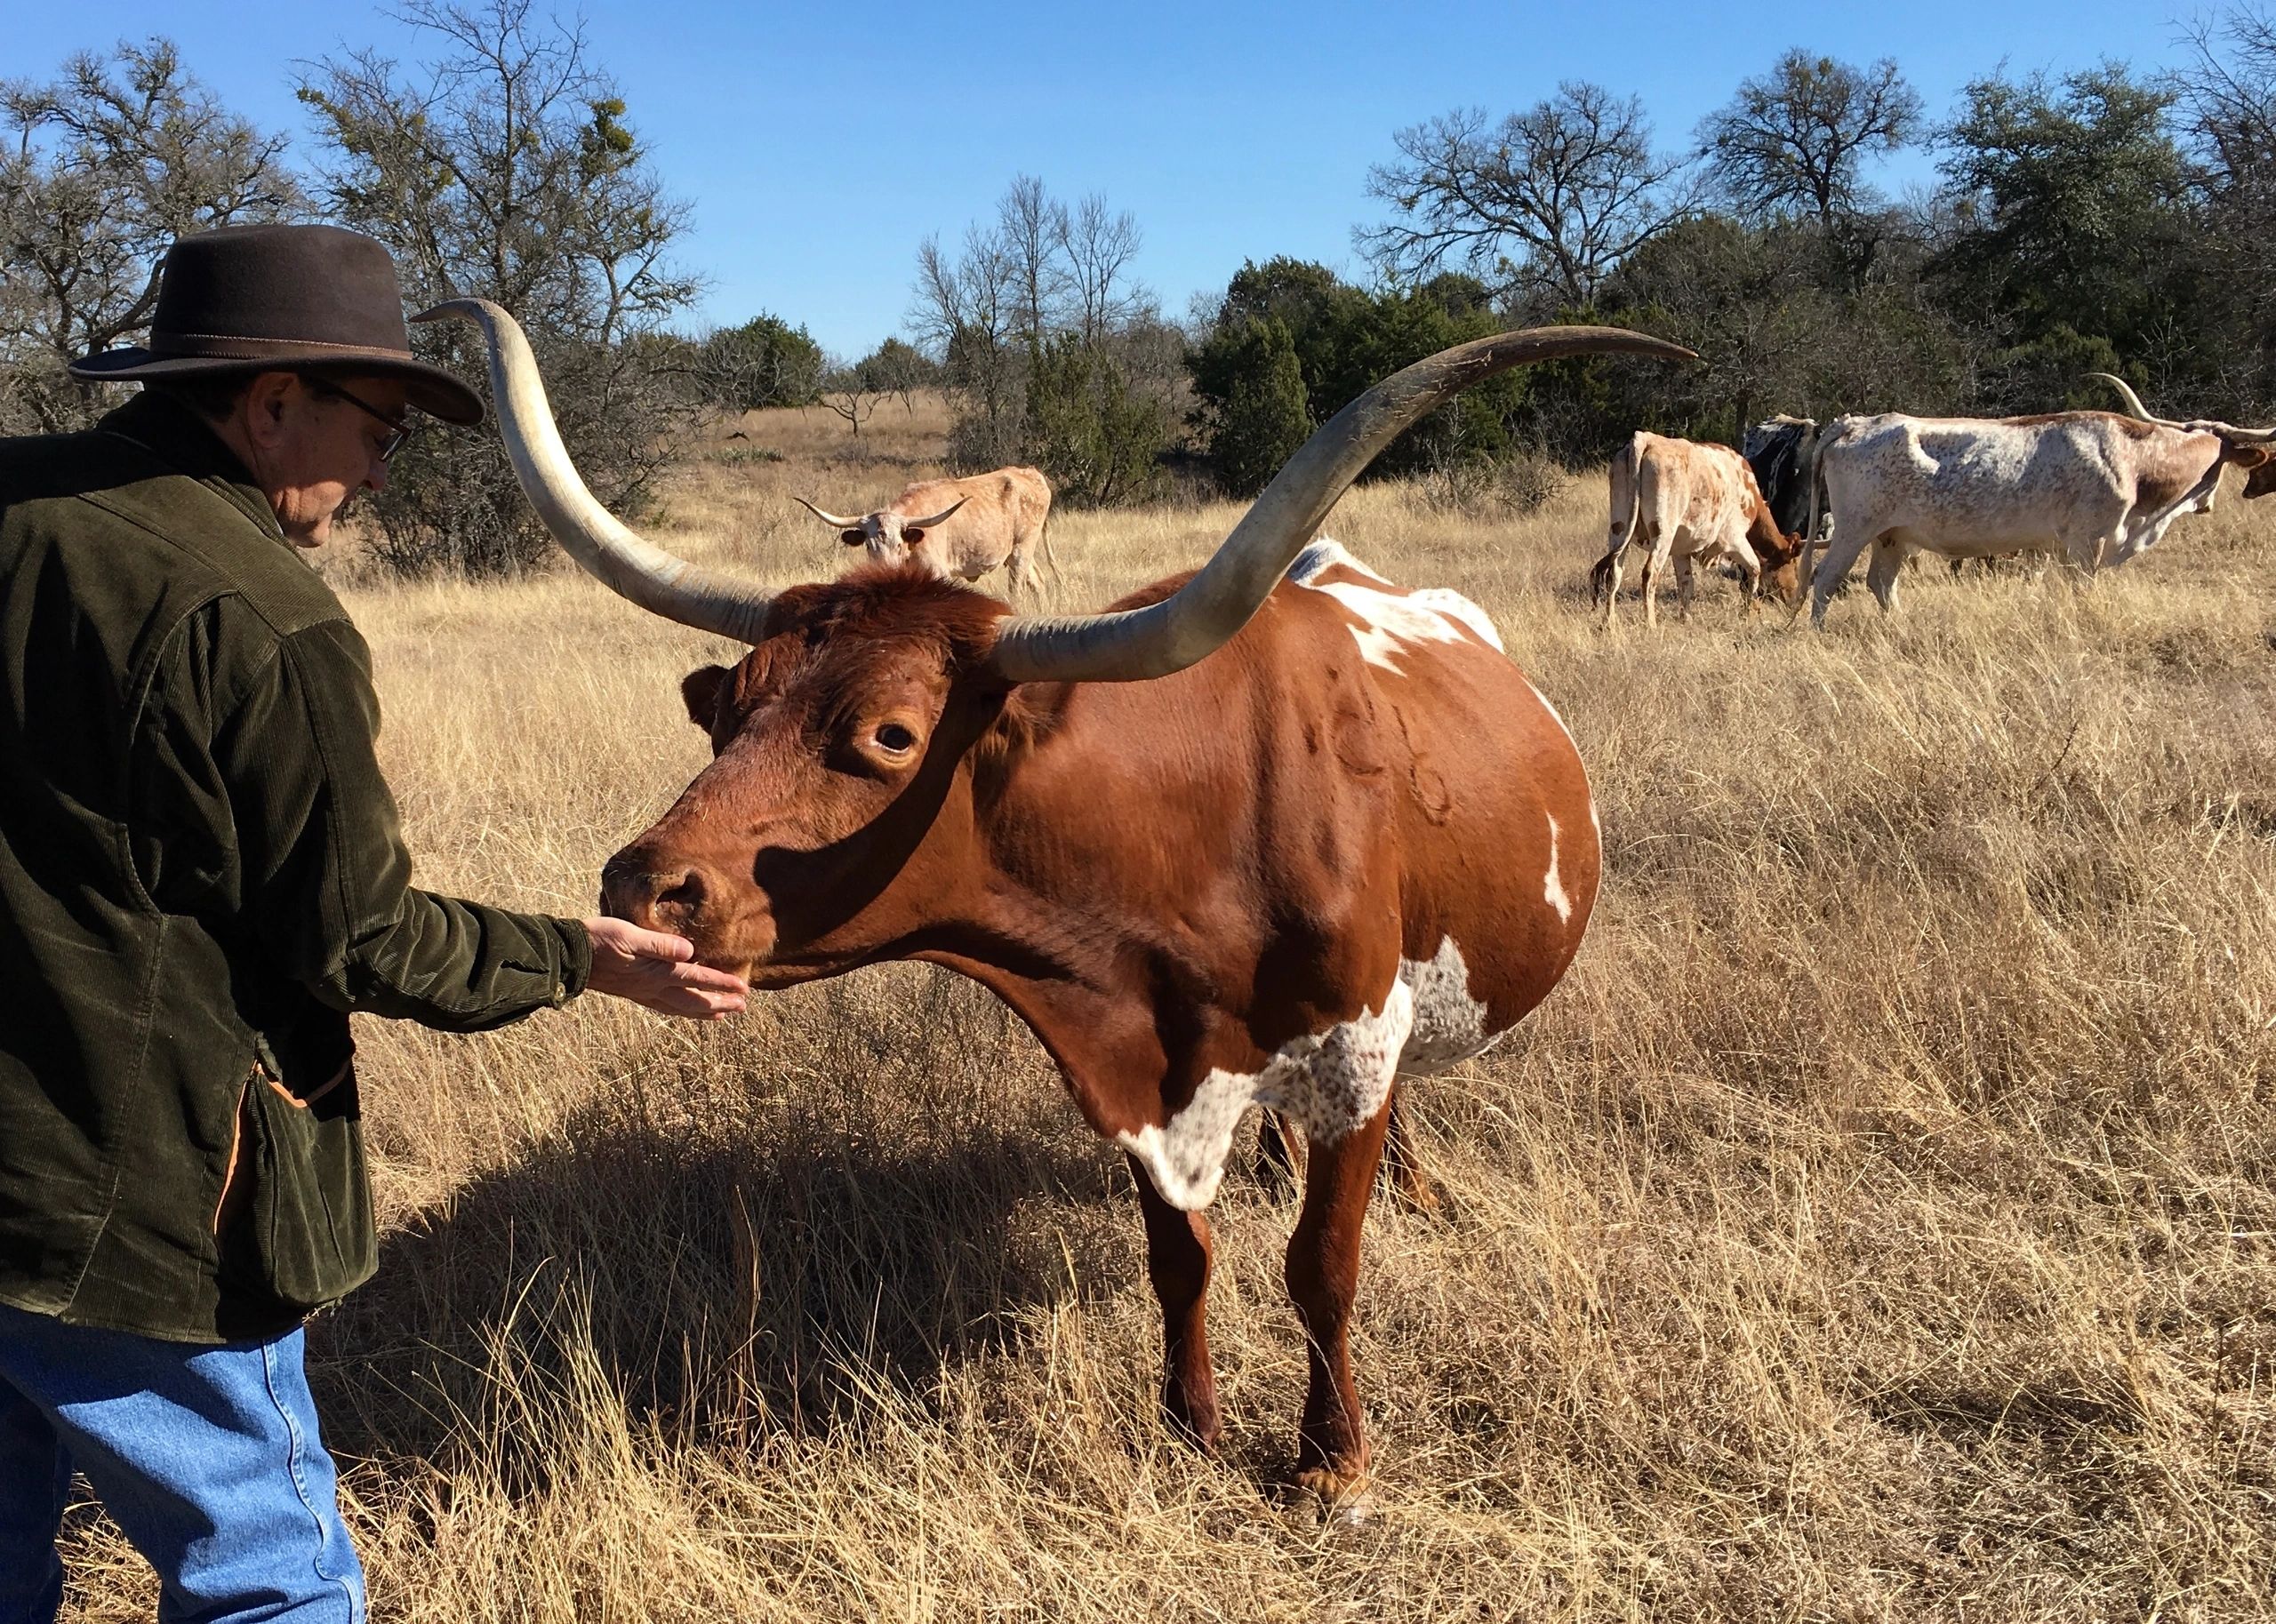 Man interacting with longhorn cattle in a field